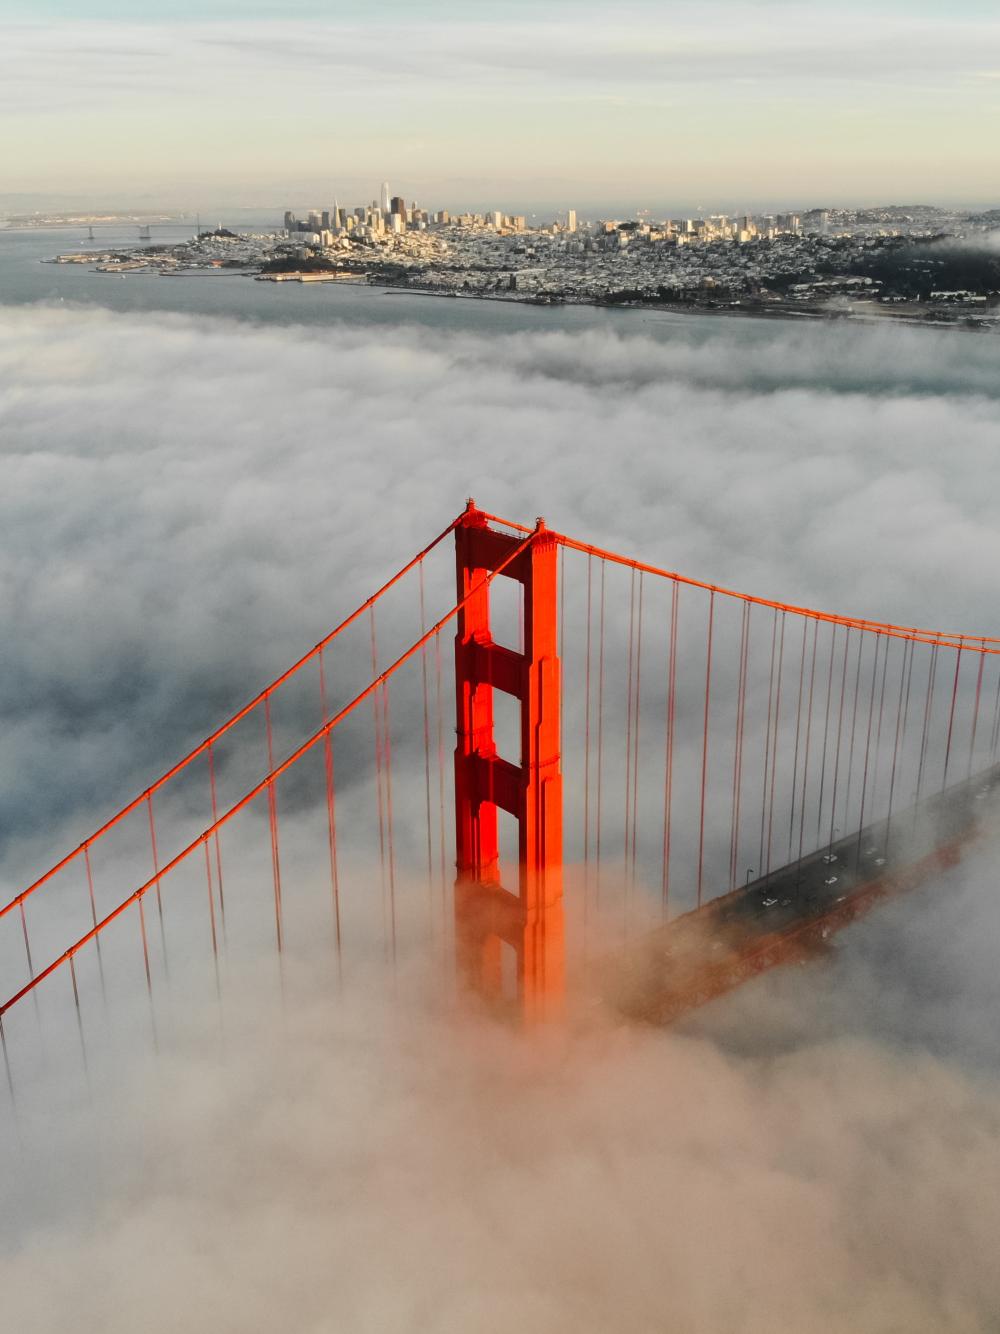 The golden gate engulfed in fog